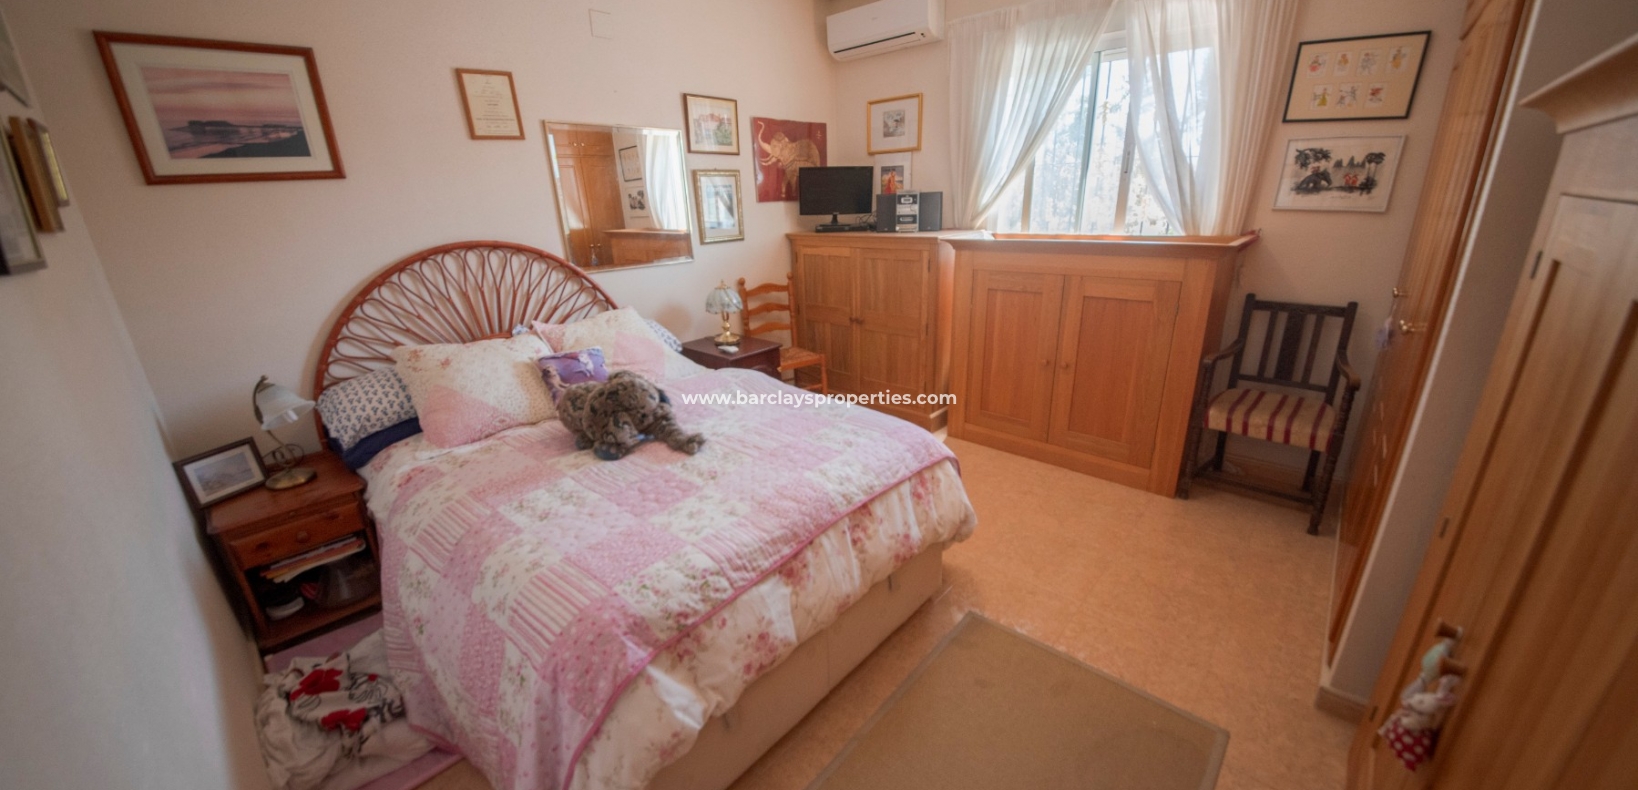 Bedroom - Country House For Sale in Catral, Spain